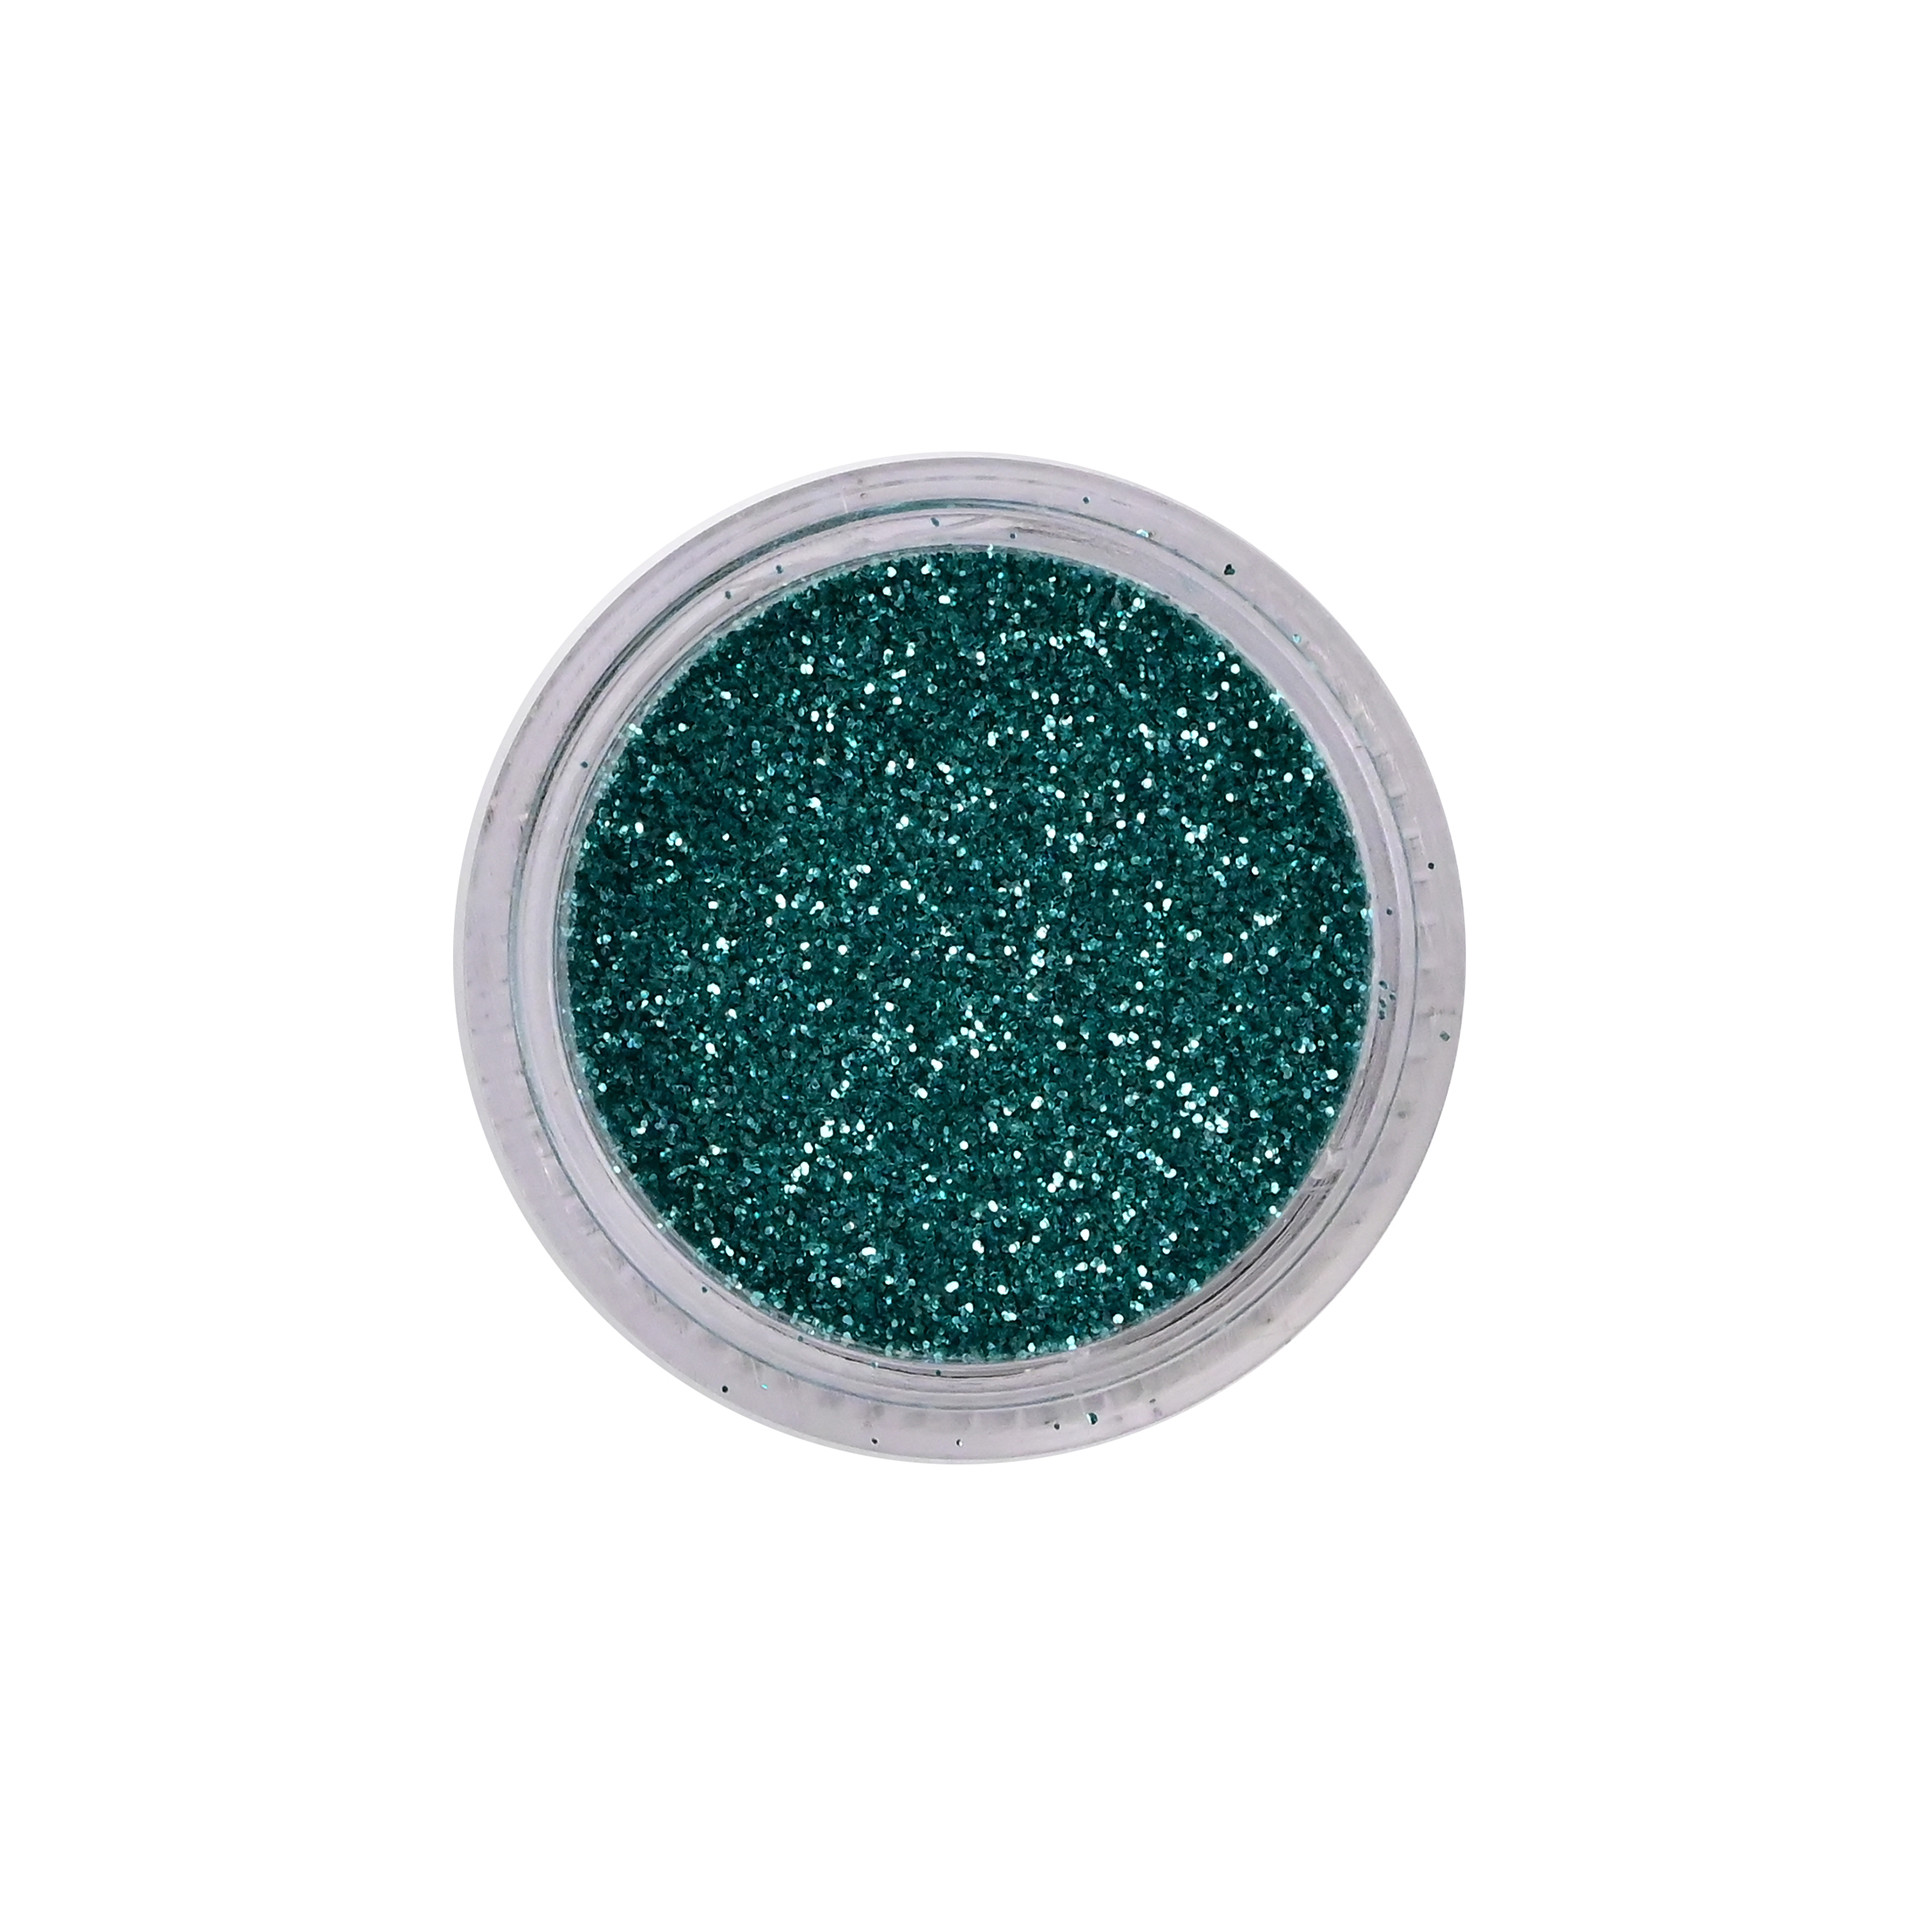 Small Turquoise Glitters Pure Glitter packaging